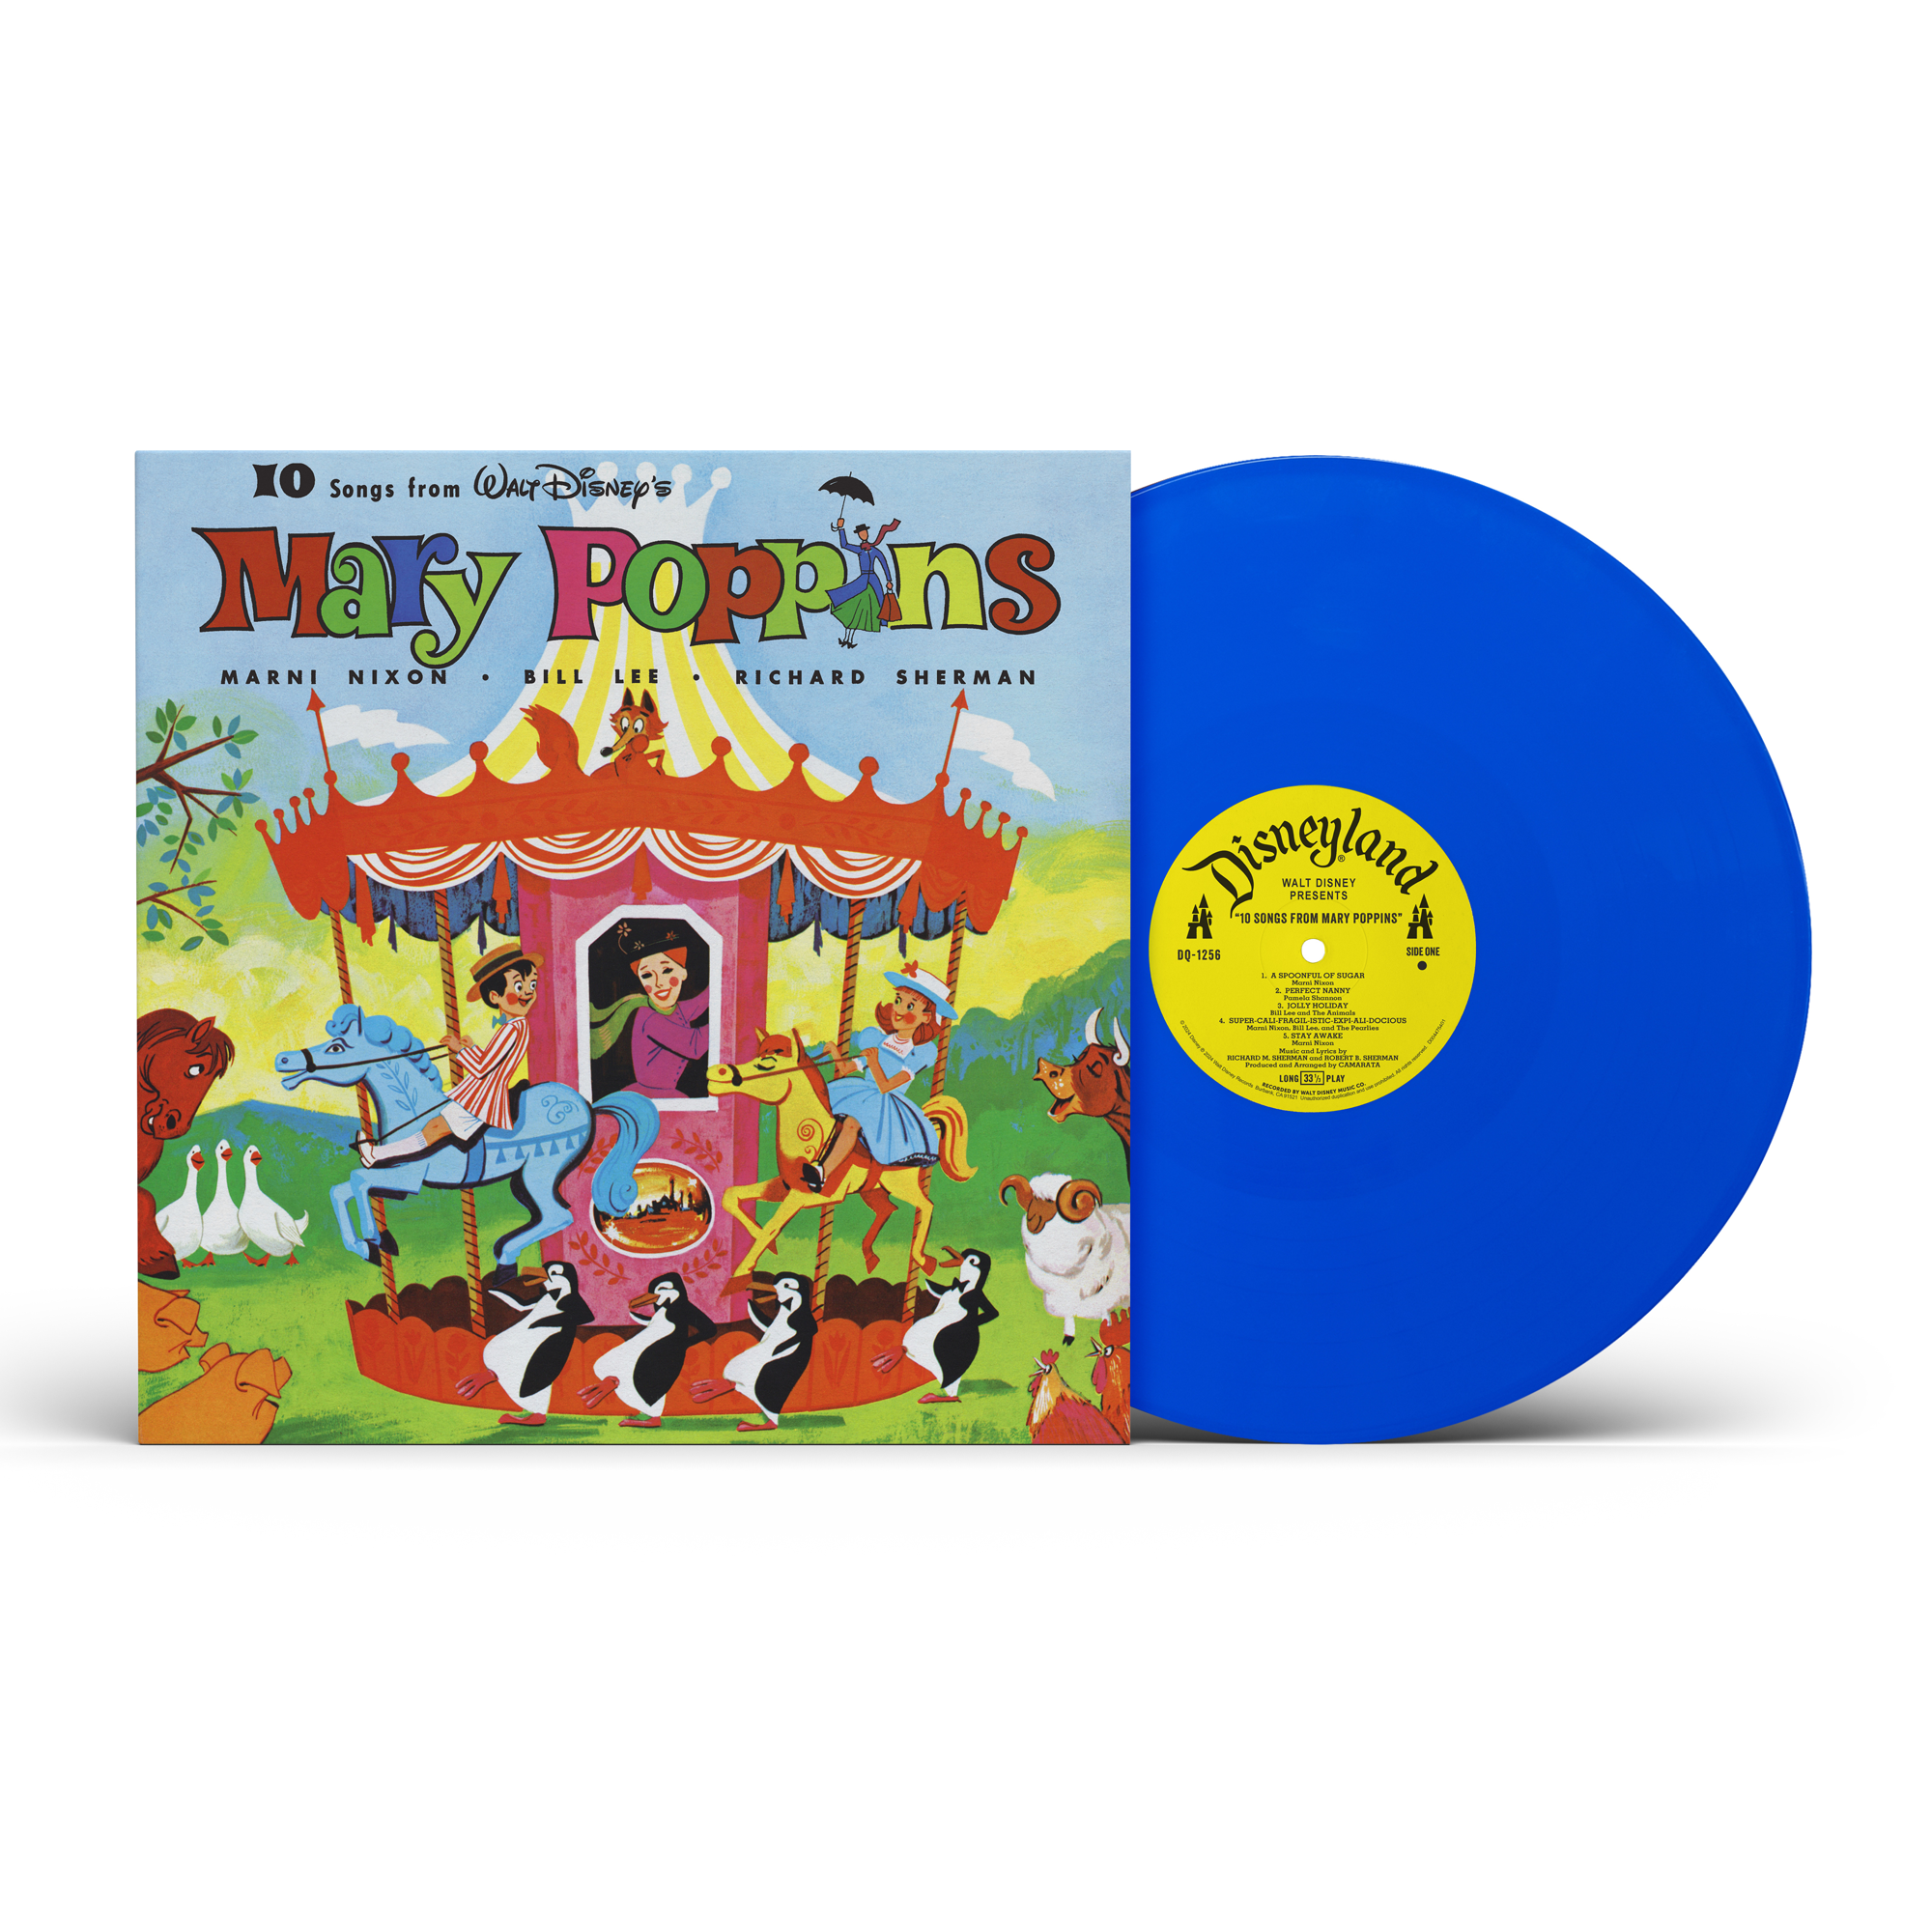 Various Artists - 10 Songs From Mary Poppins (60th Anniversary): Limited Blue Vinyl LP